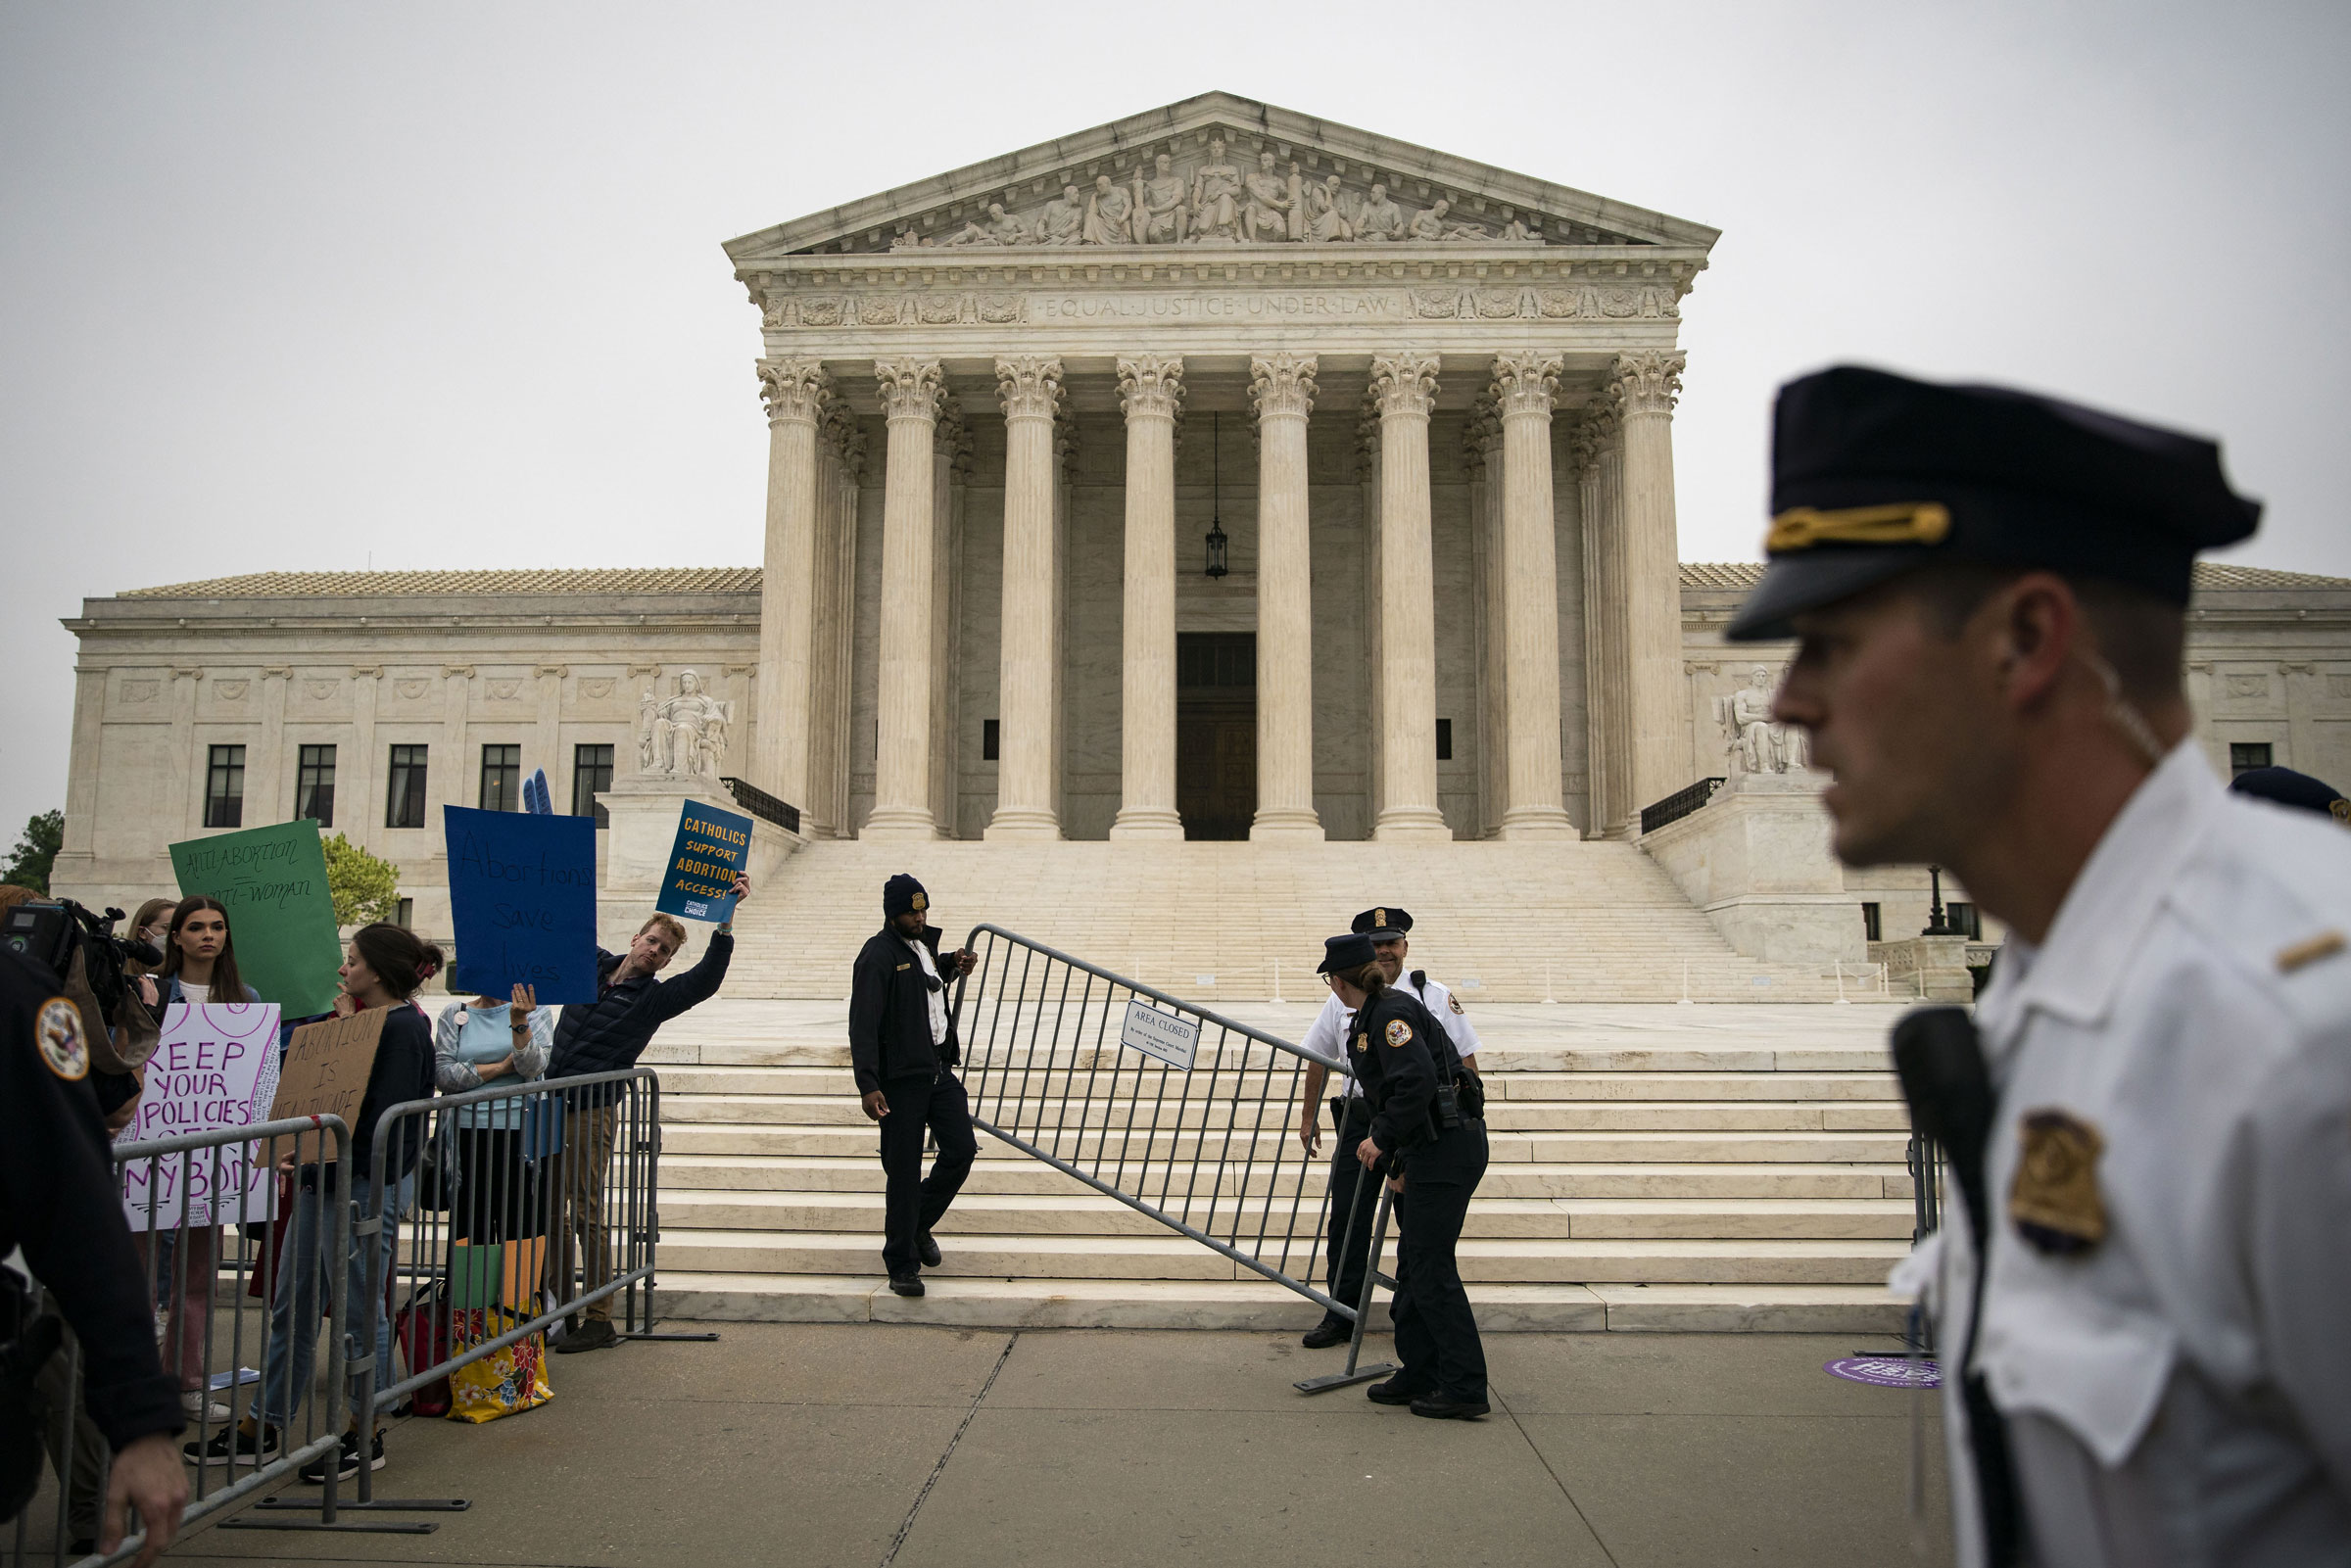 U.S. Supreme Court police officers set up barricades during a protest outside of the U.S. Supreme Court in Washington, D.C., U.S., on Tuesday, May 3, 2022. (Al Drago—Bloomberg/Getty Images)